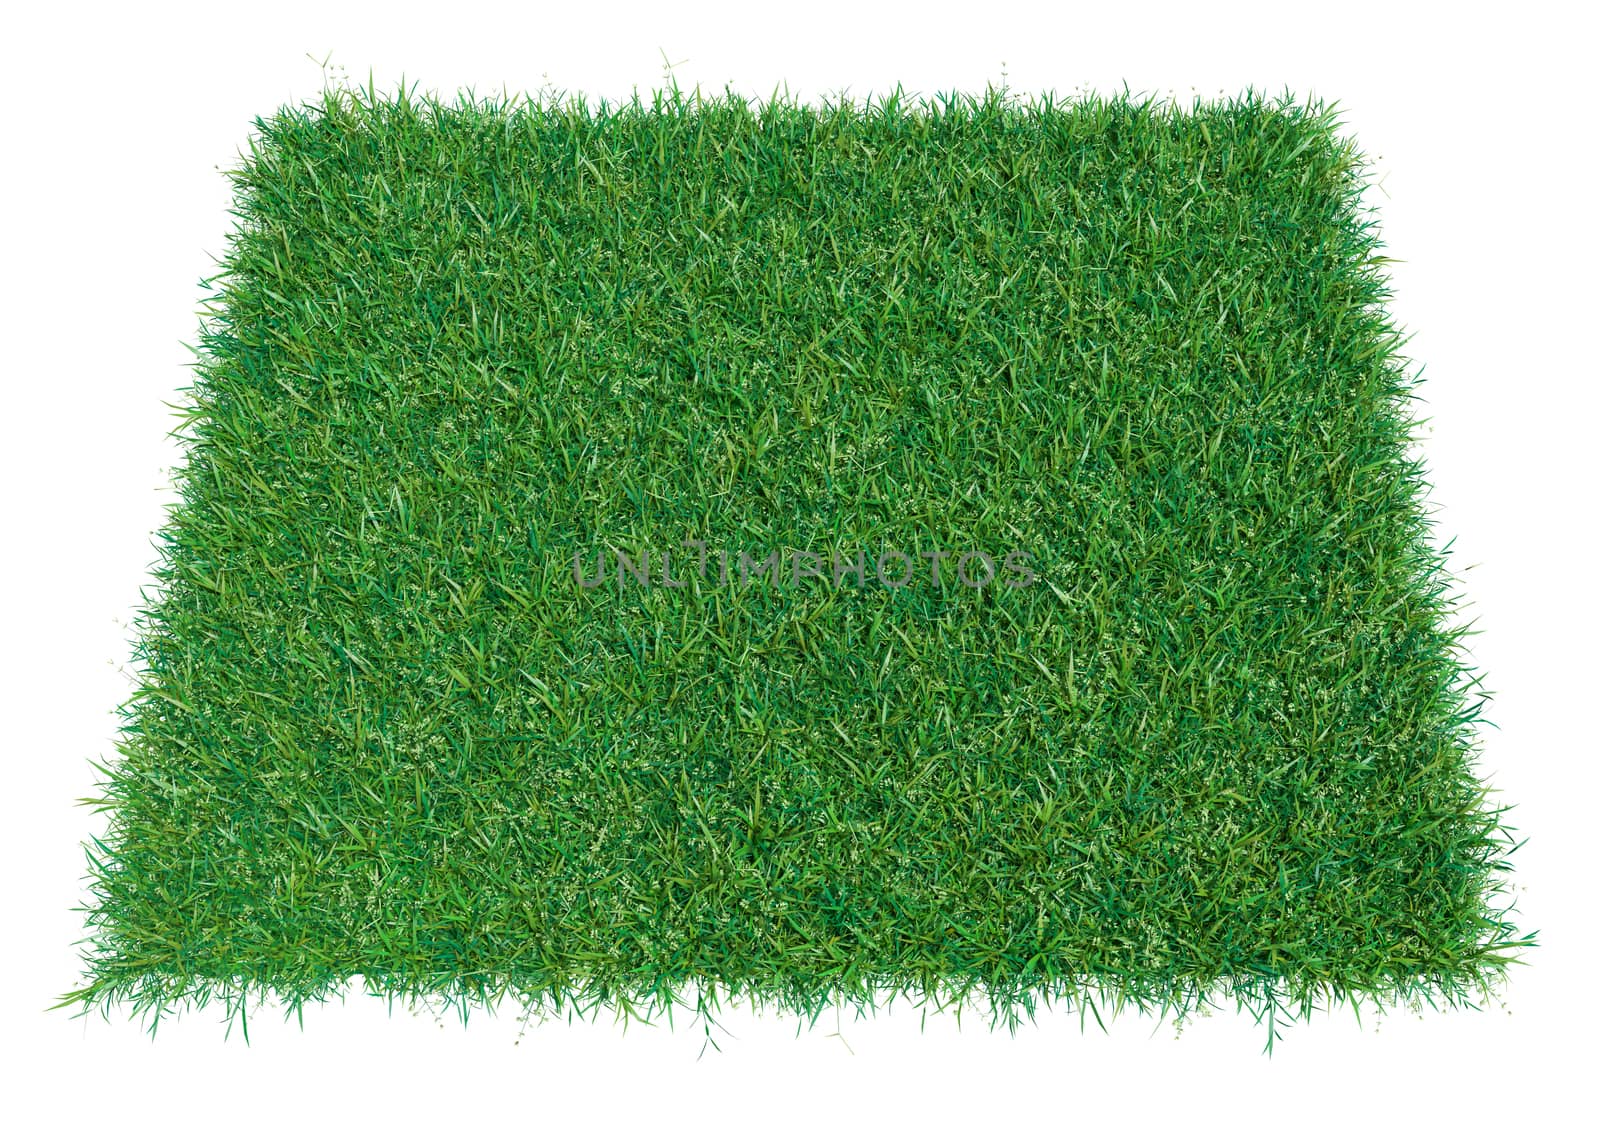 3d rendering of green grass arena, isolated on white background. Empty space for your product or text